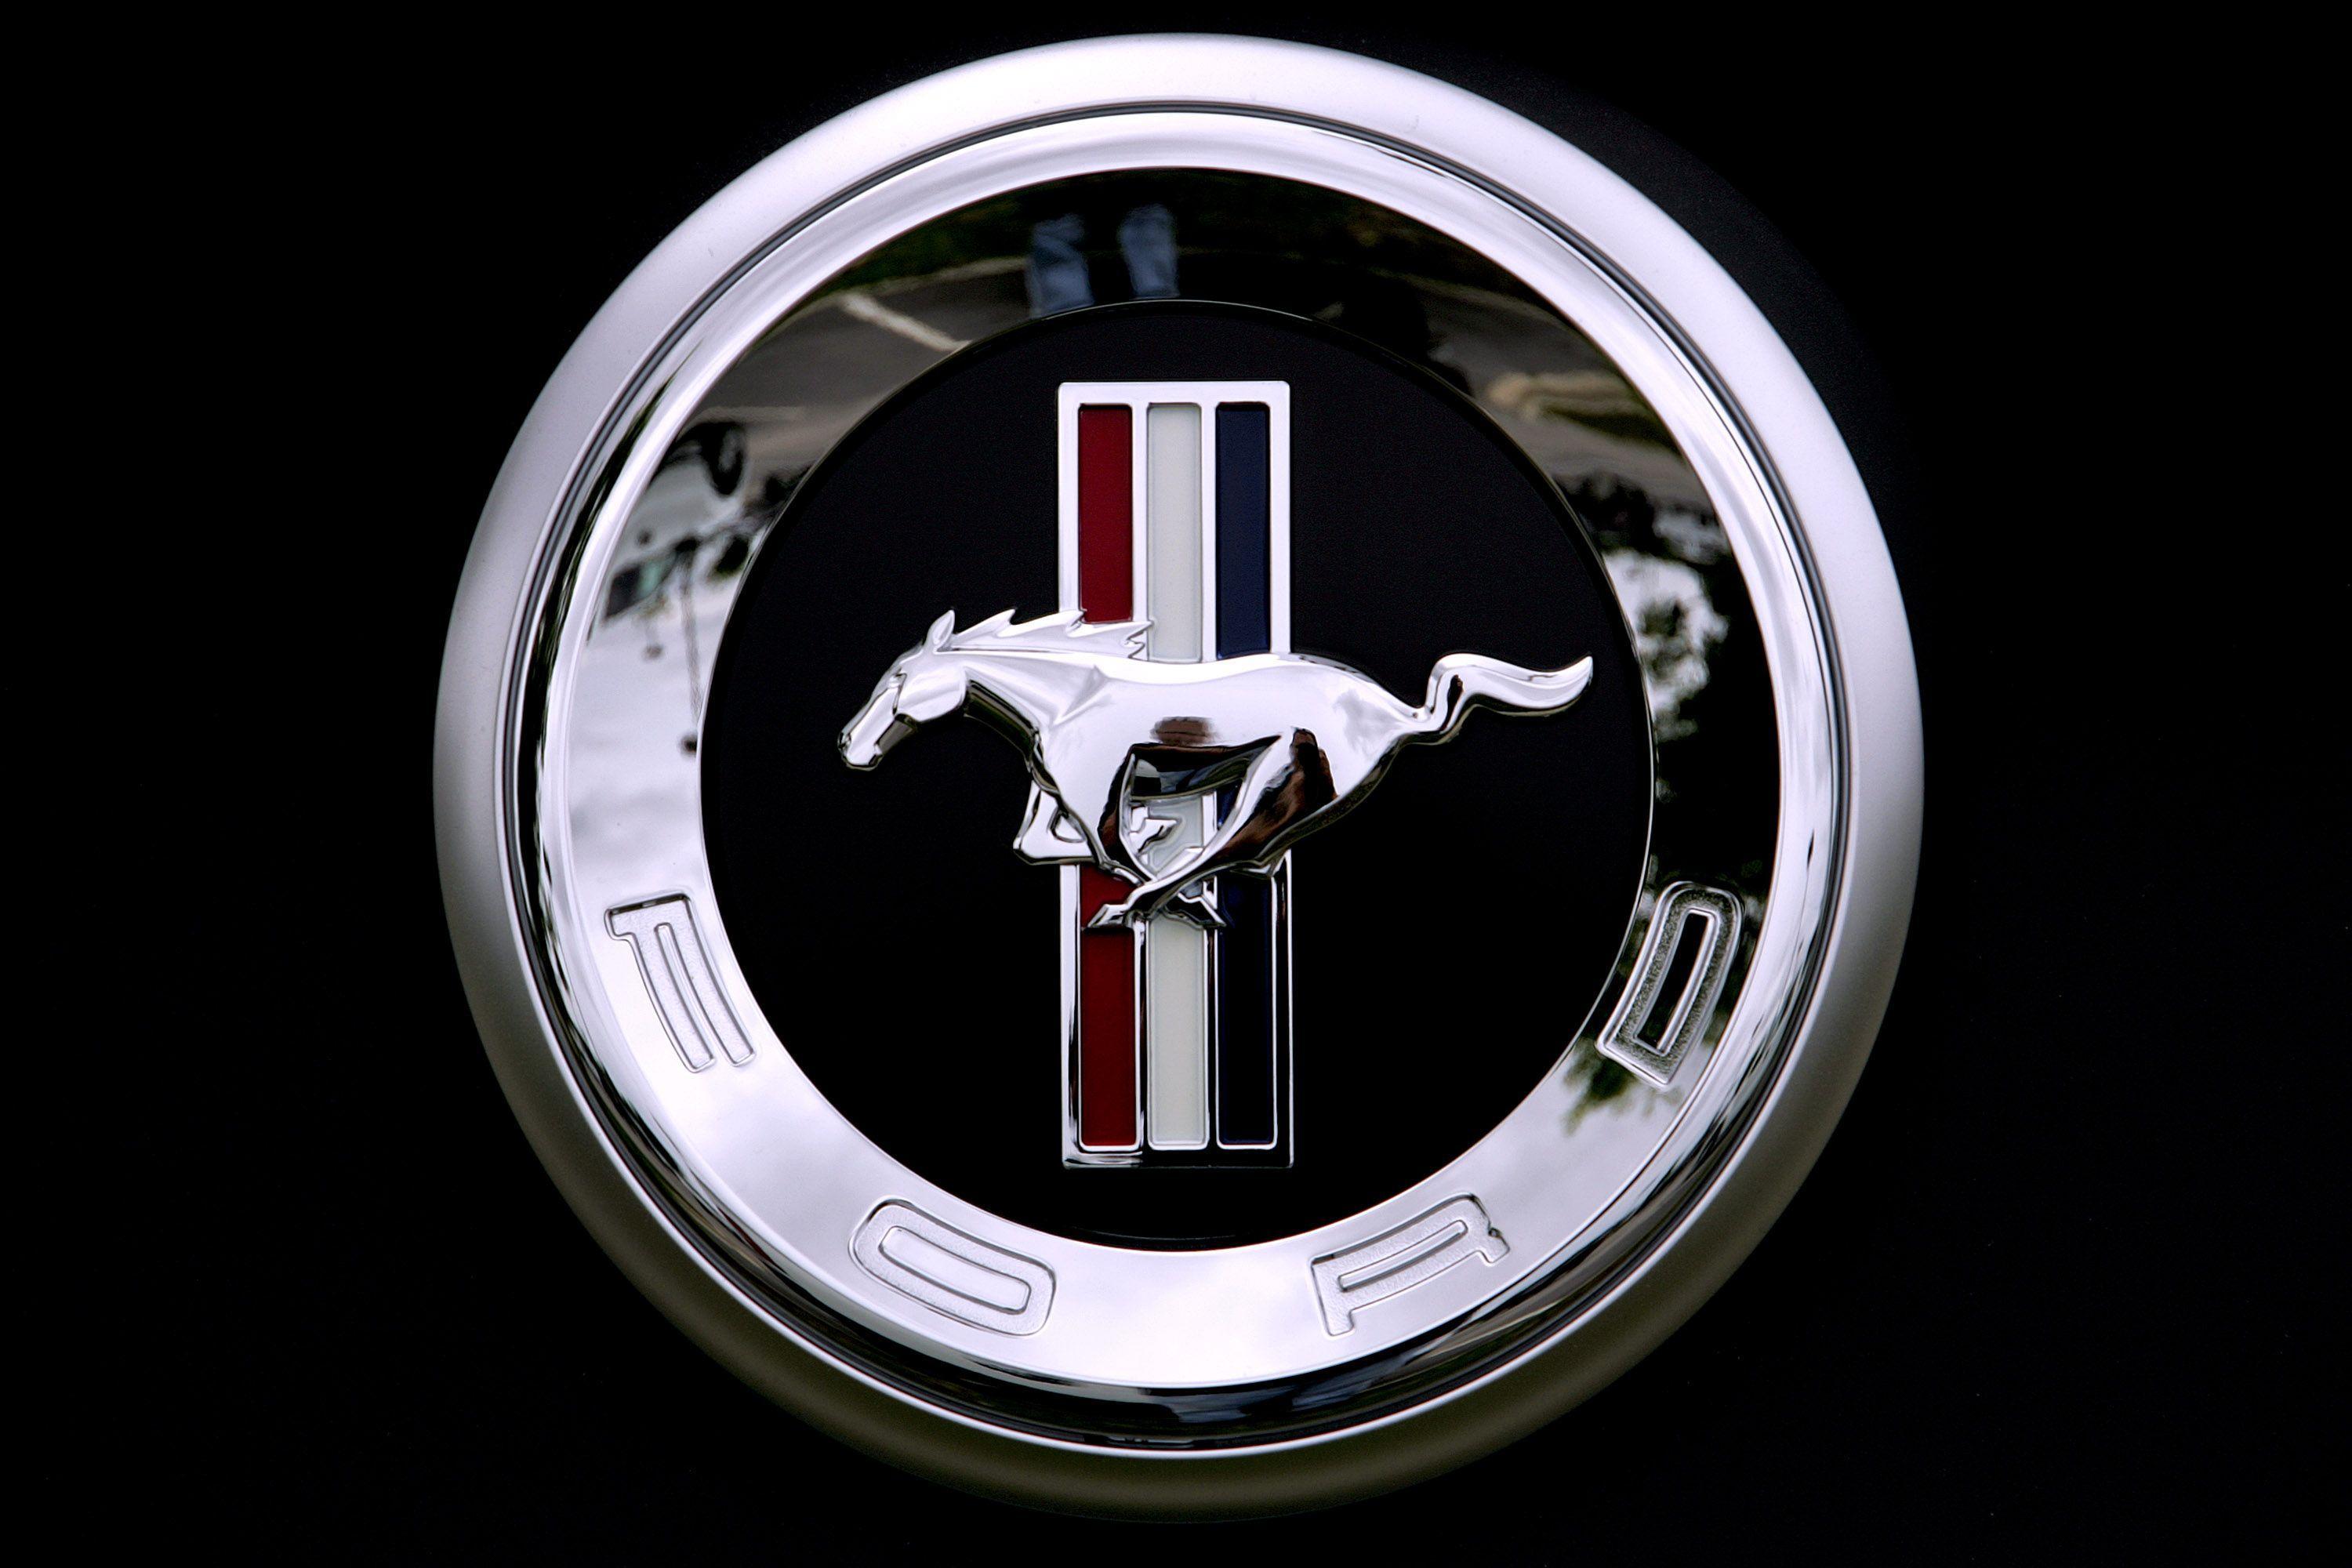 Ford Mustang Logo Wallpapers